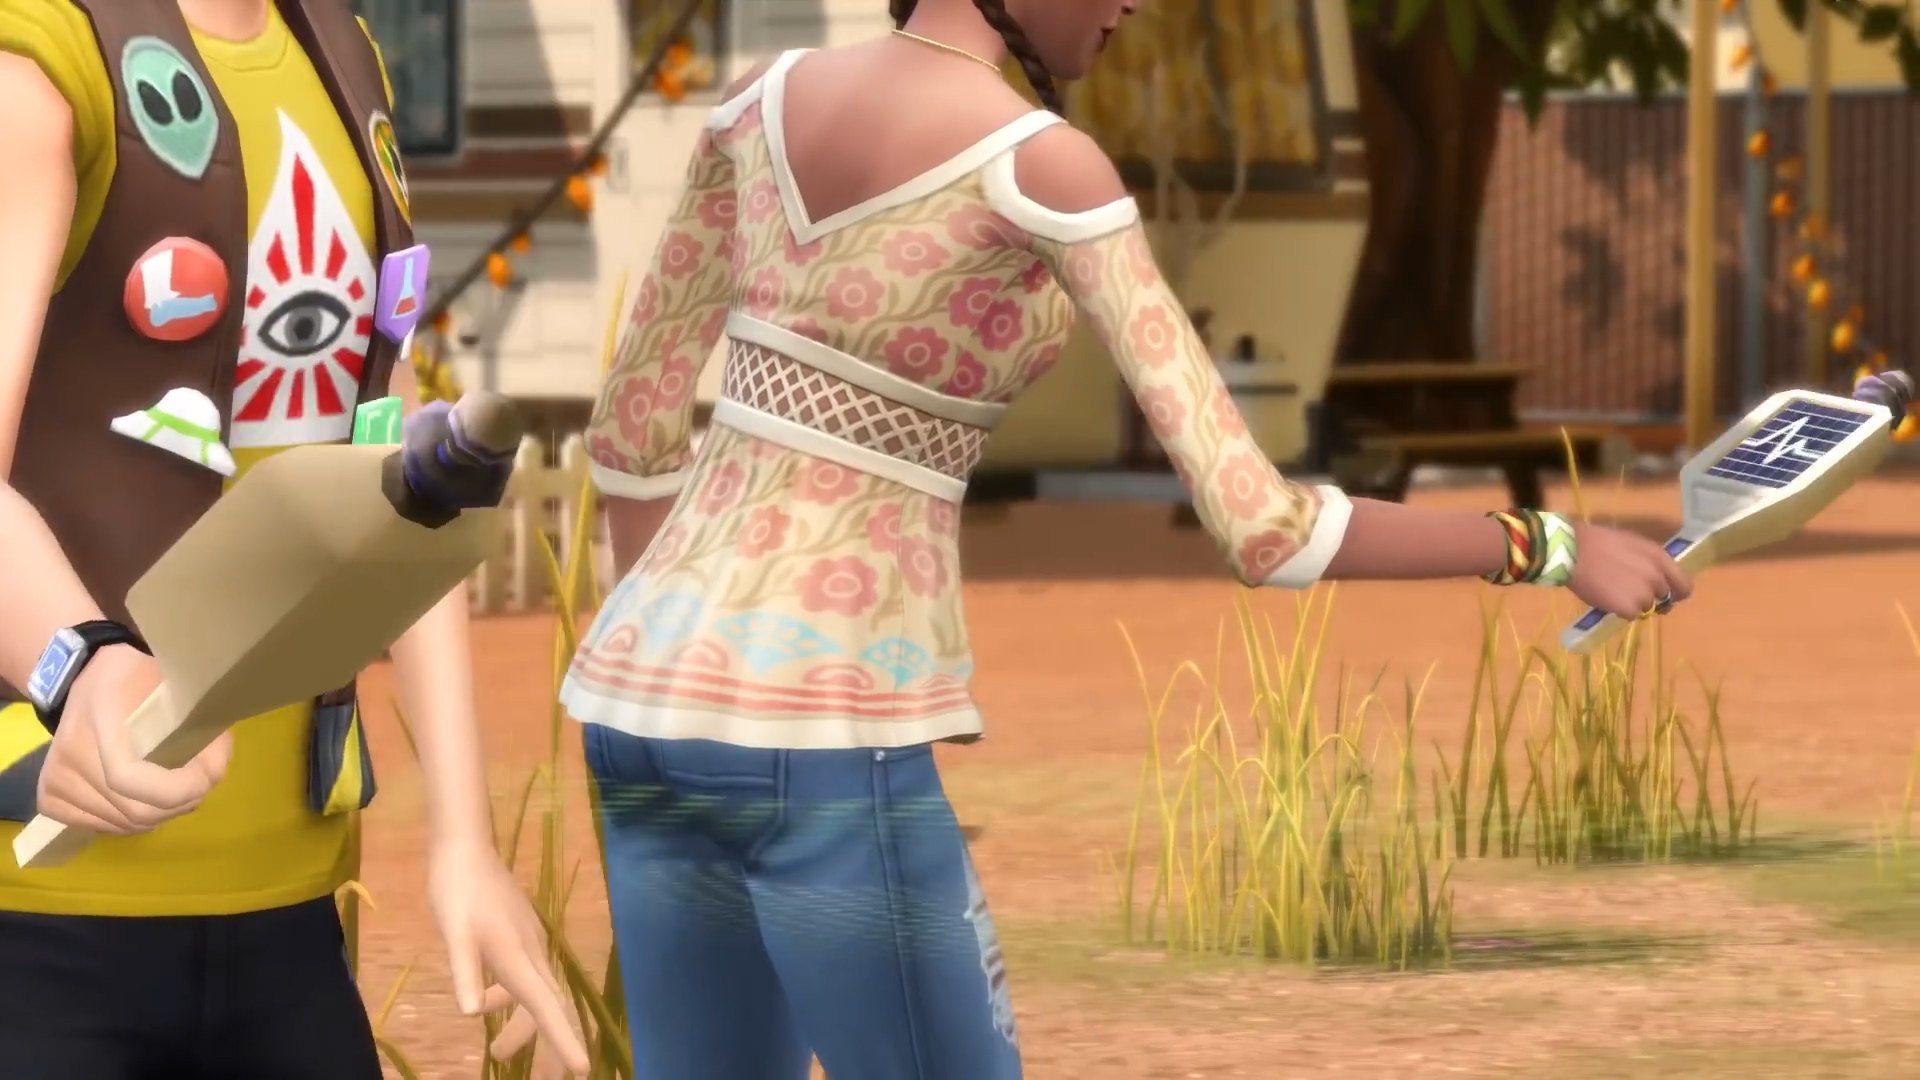 The Sims 4 Strangerville - Sims can use geiger counters of some sort to investigate Strangerville's big mystery